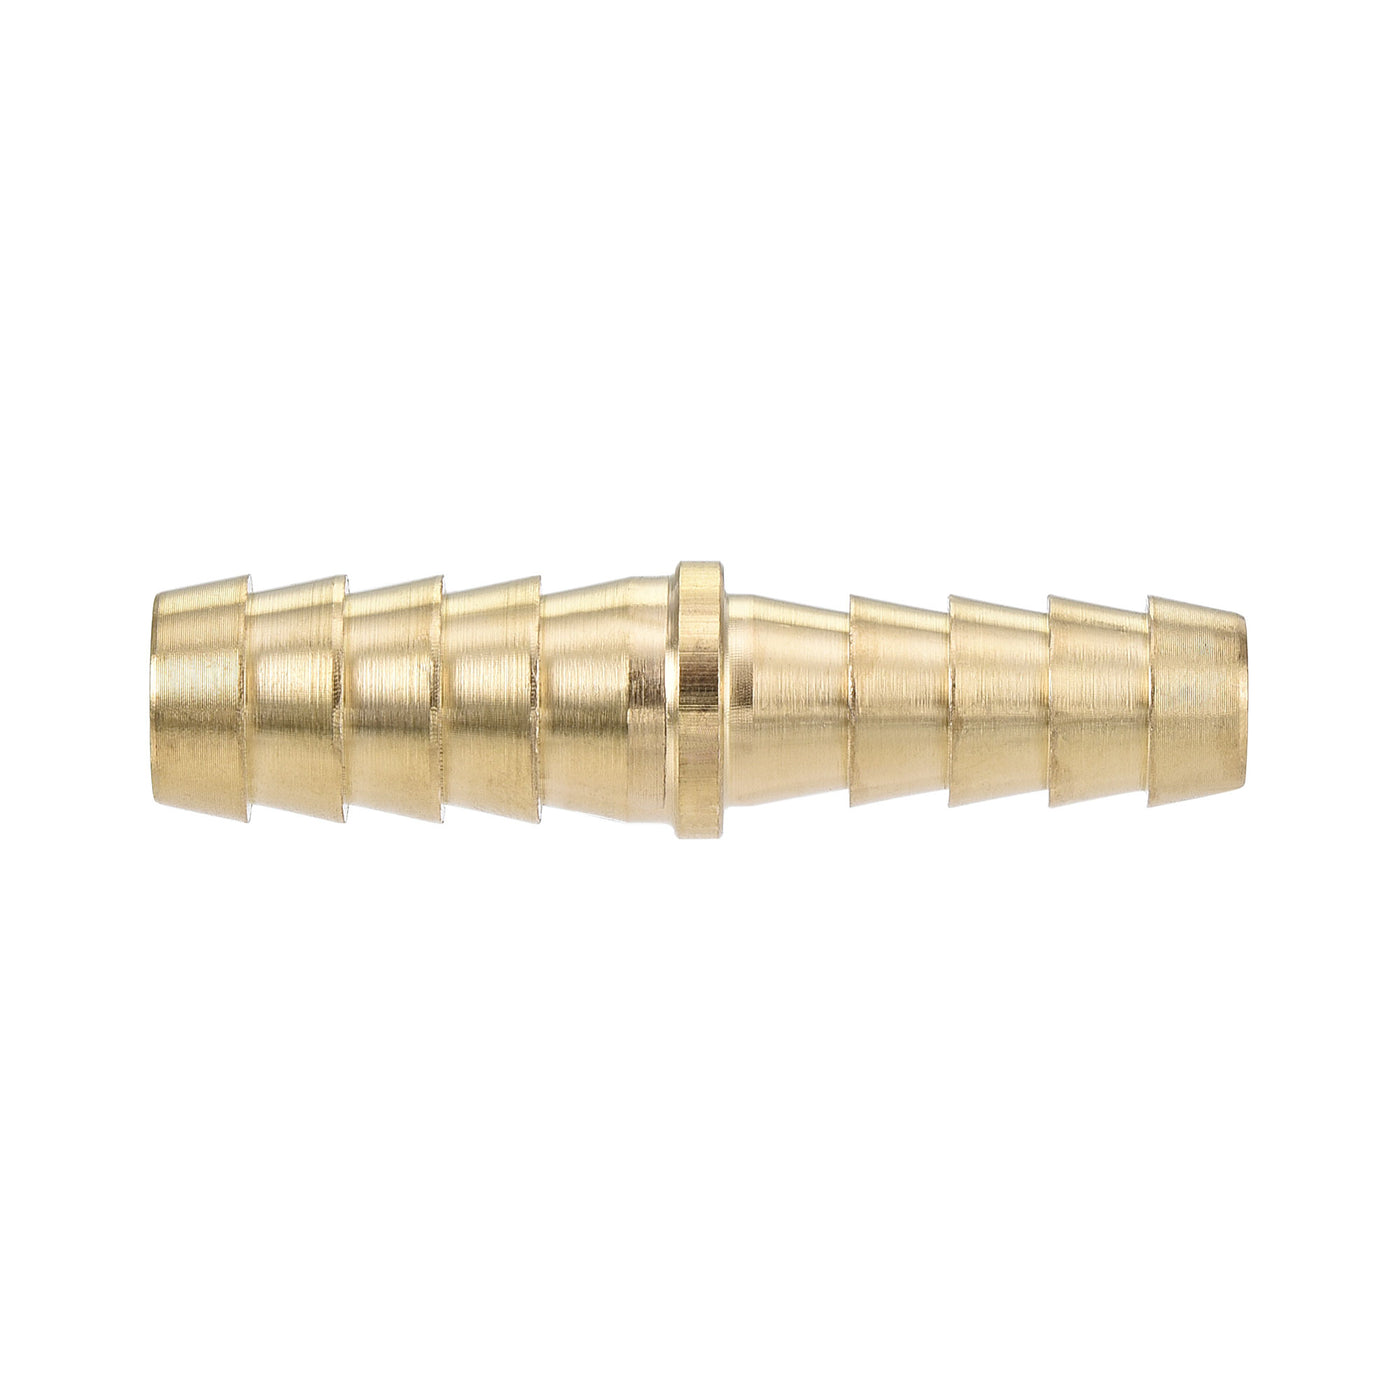 uxcell Uxcell Hose Barb Fitting, 5/16x3/8inch Brass Hollow Straight Quick Connector for Water Fuel Air Oil Gas